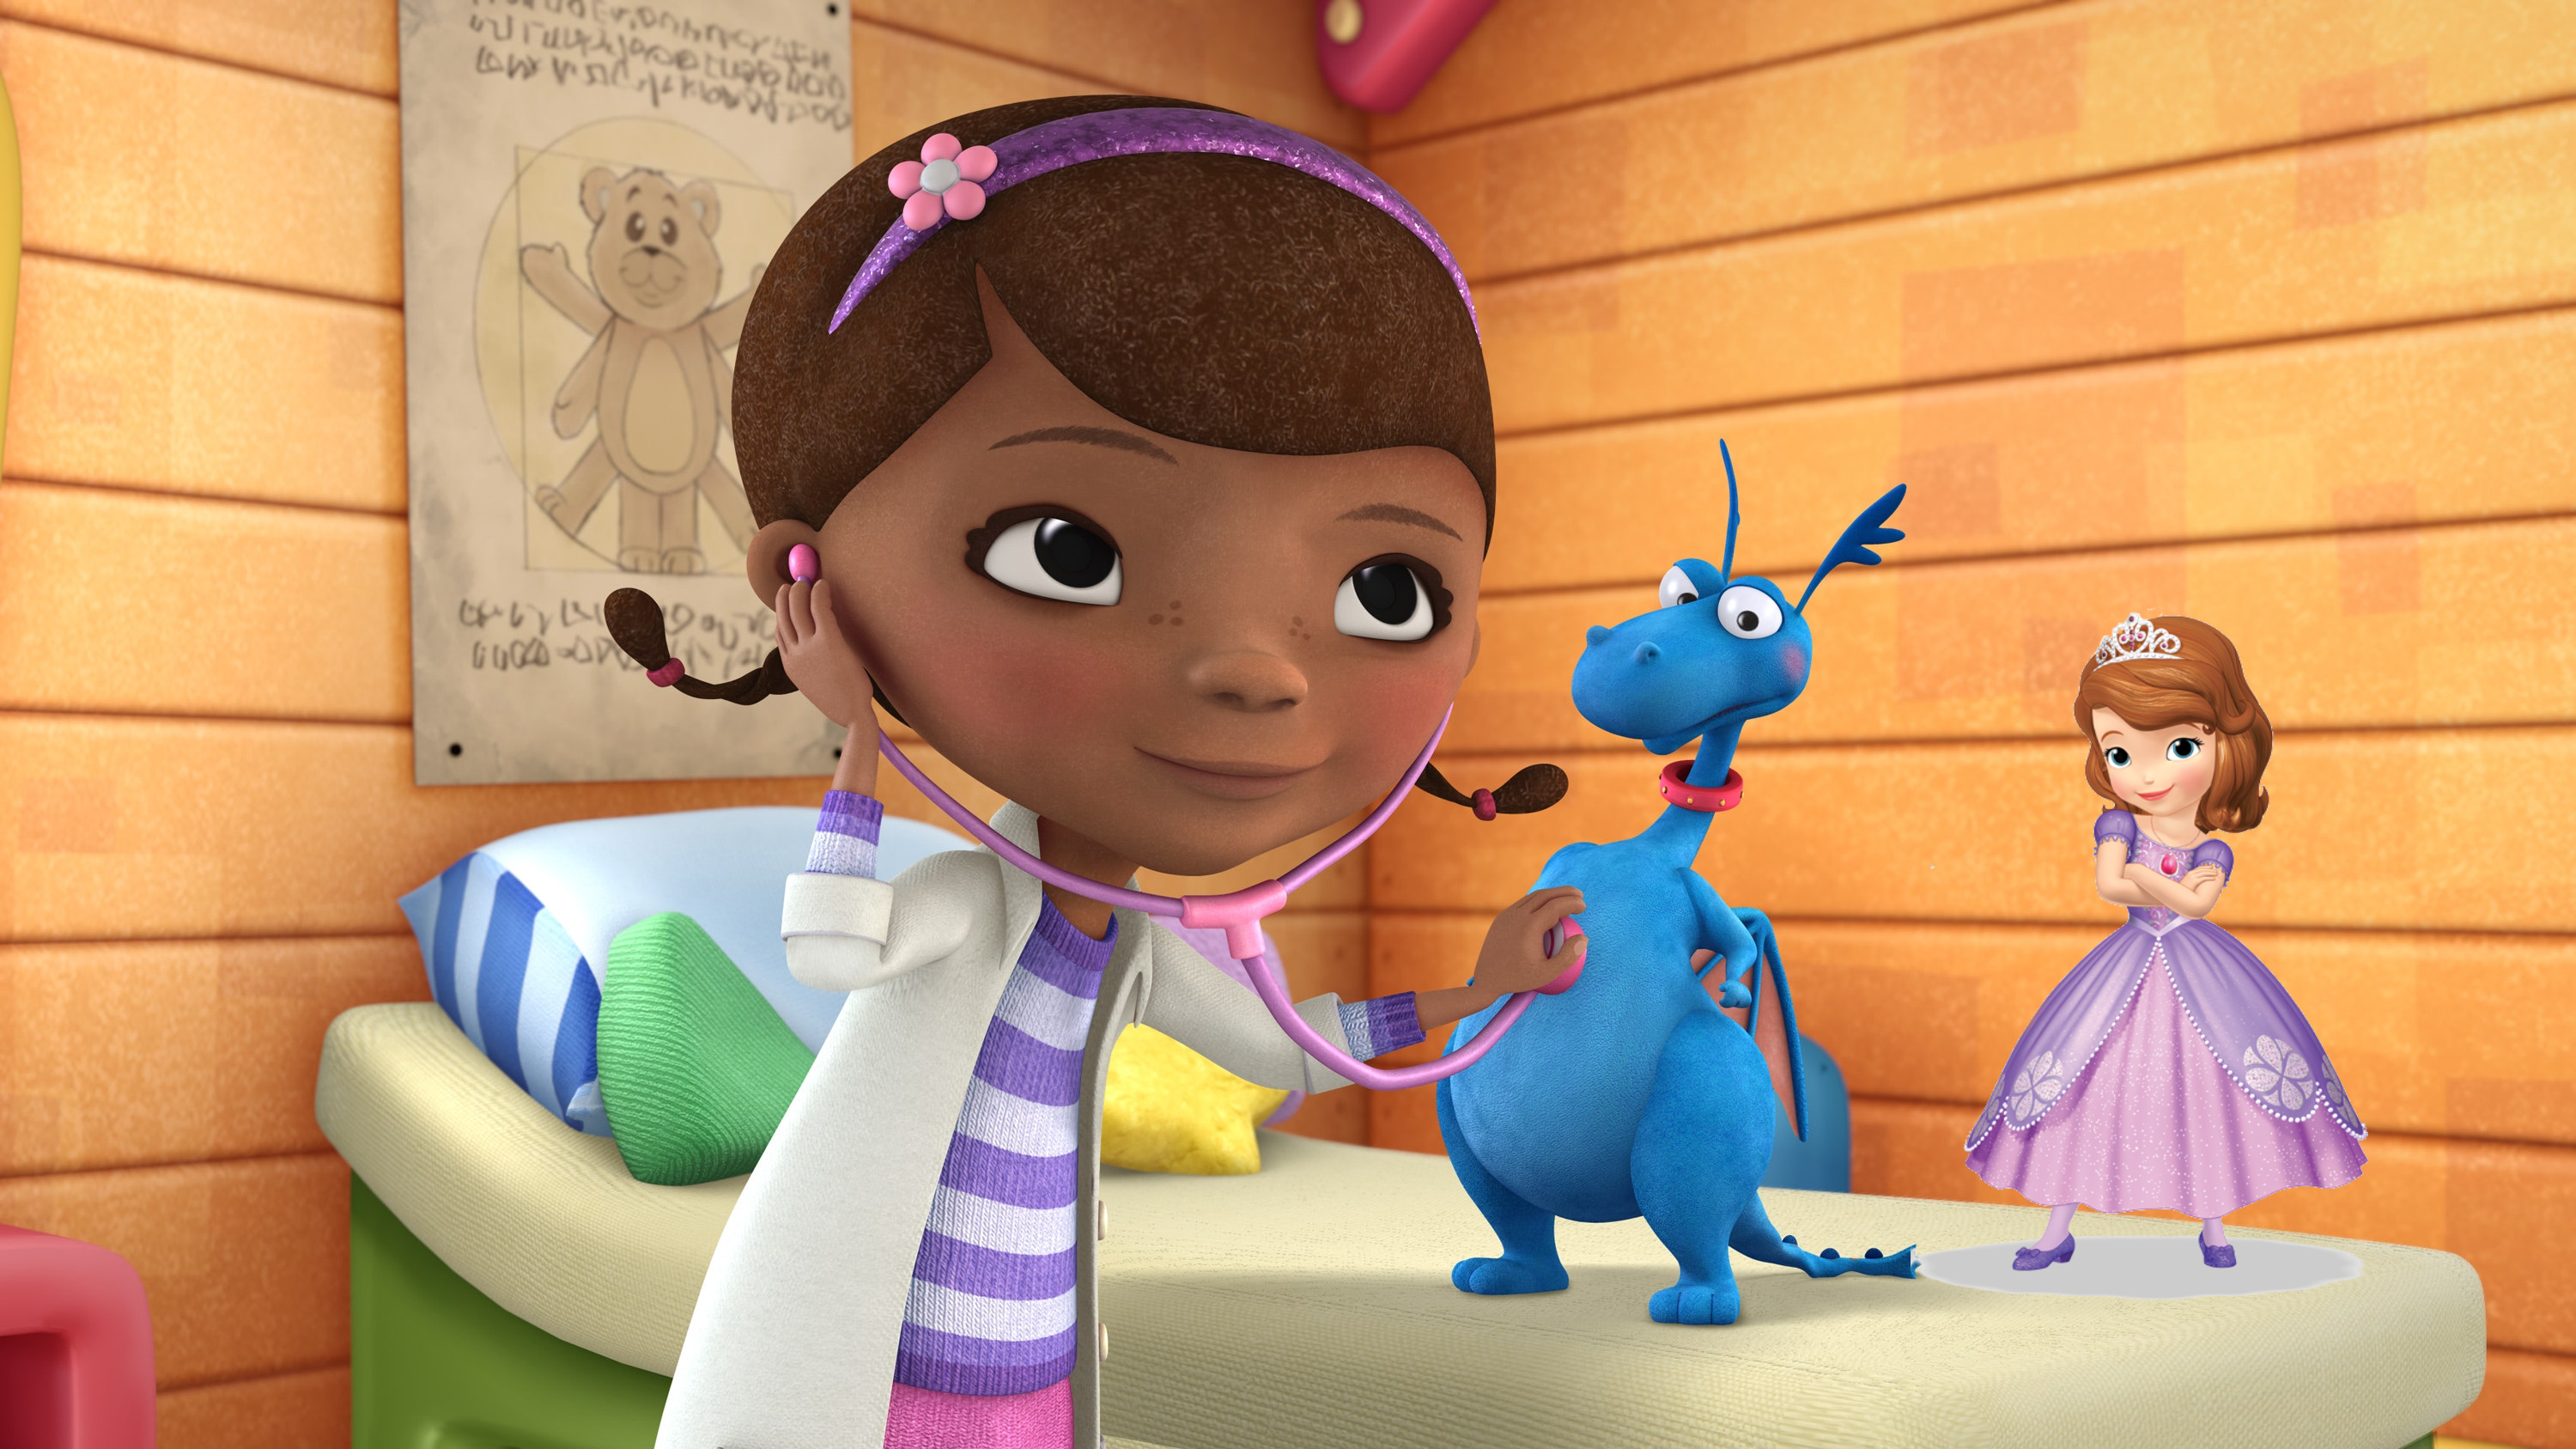 doc mcstuffins and Sofia by Joanna - created by Joanna Funmilola with paint